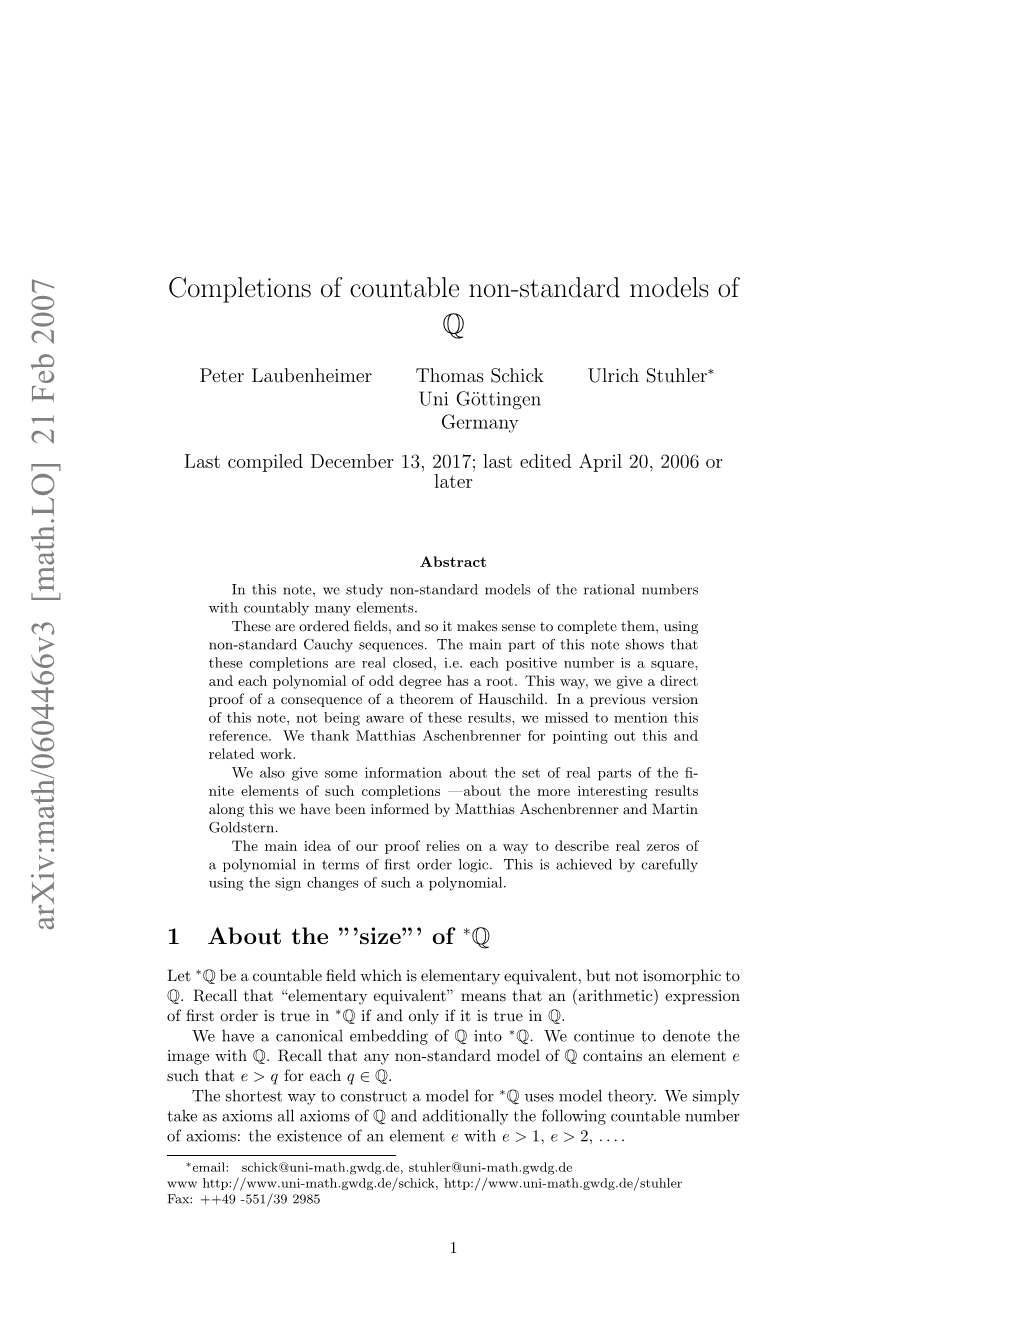 Completions of Countable Non-Standard Models of Q